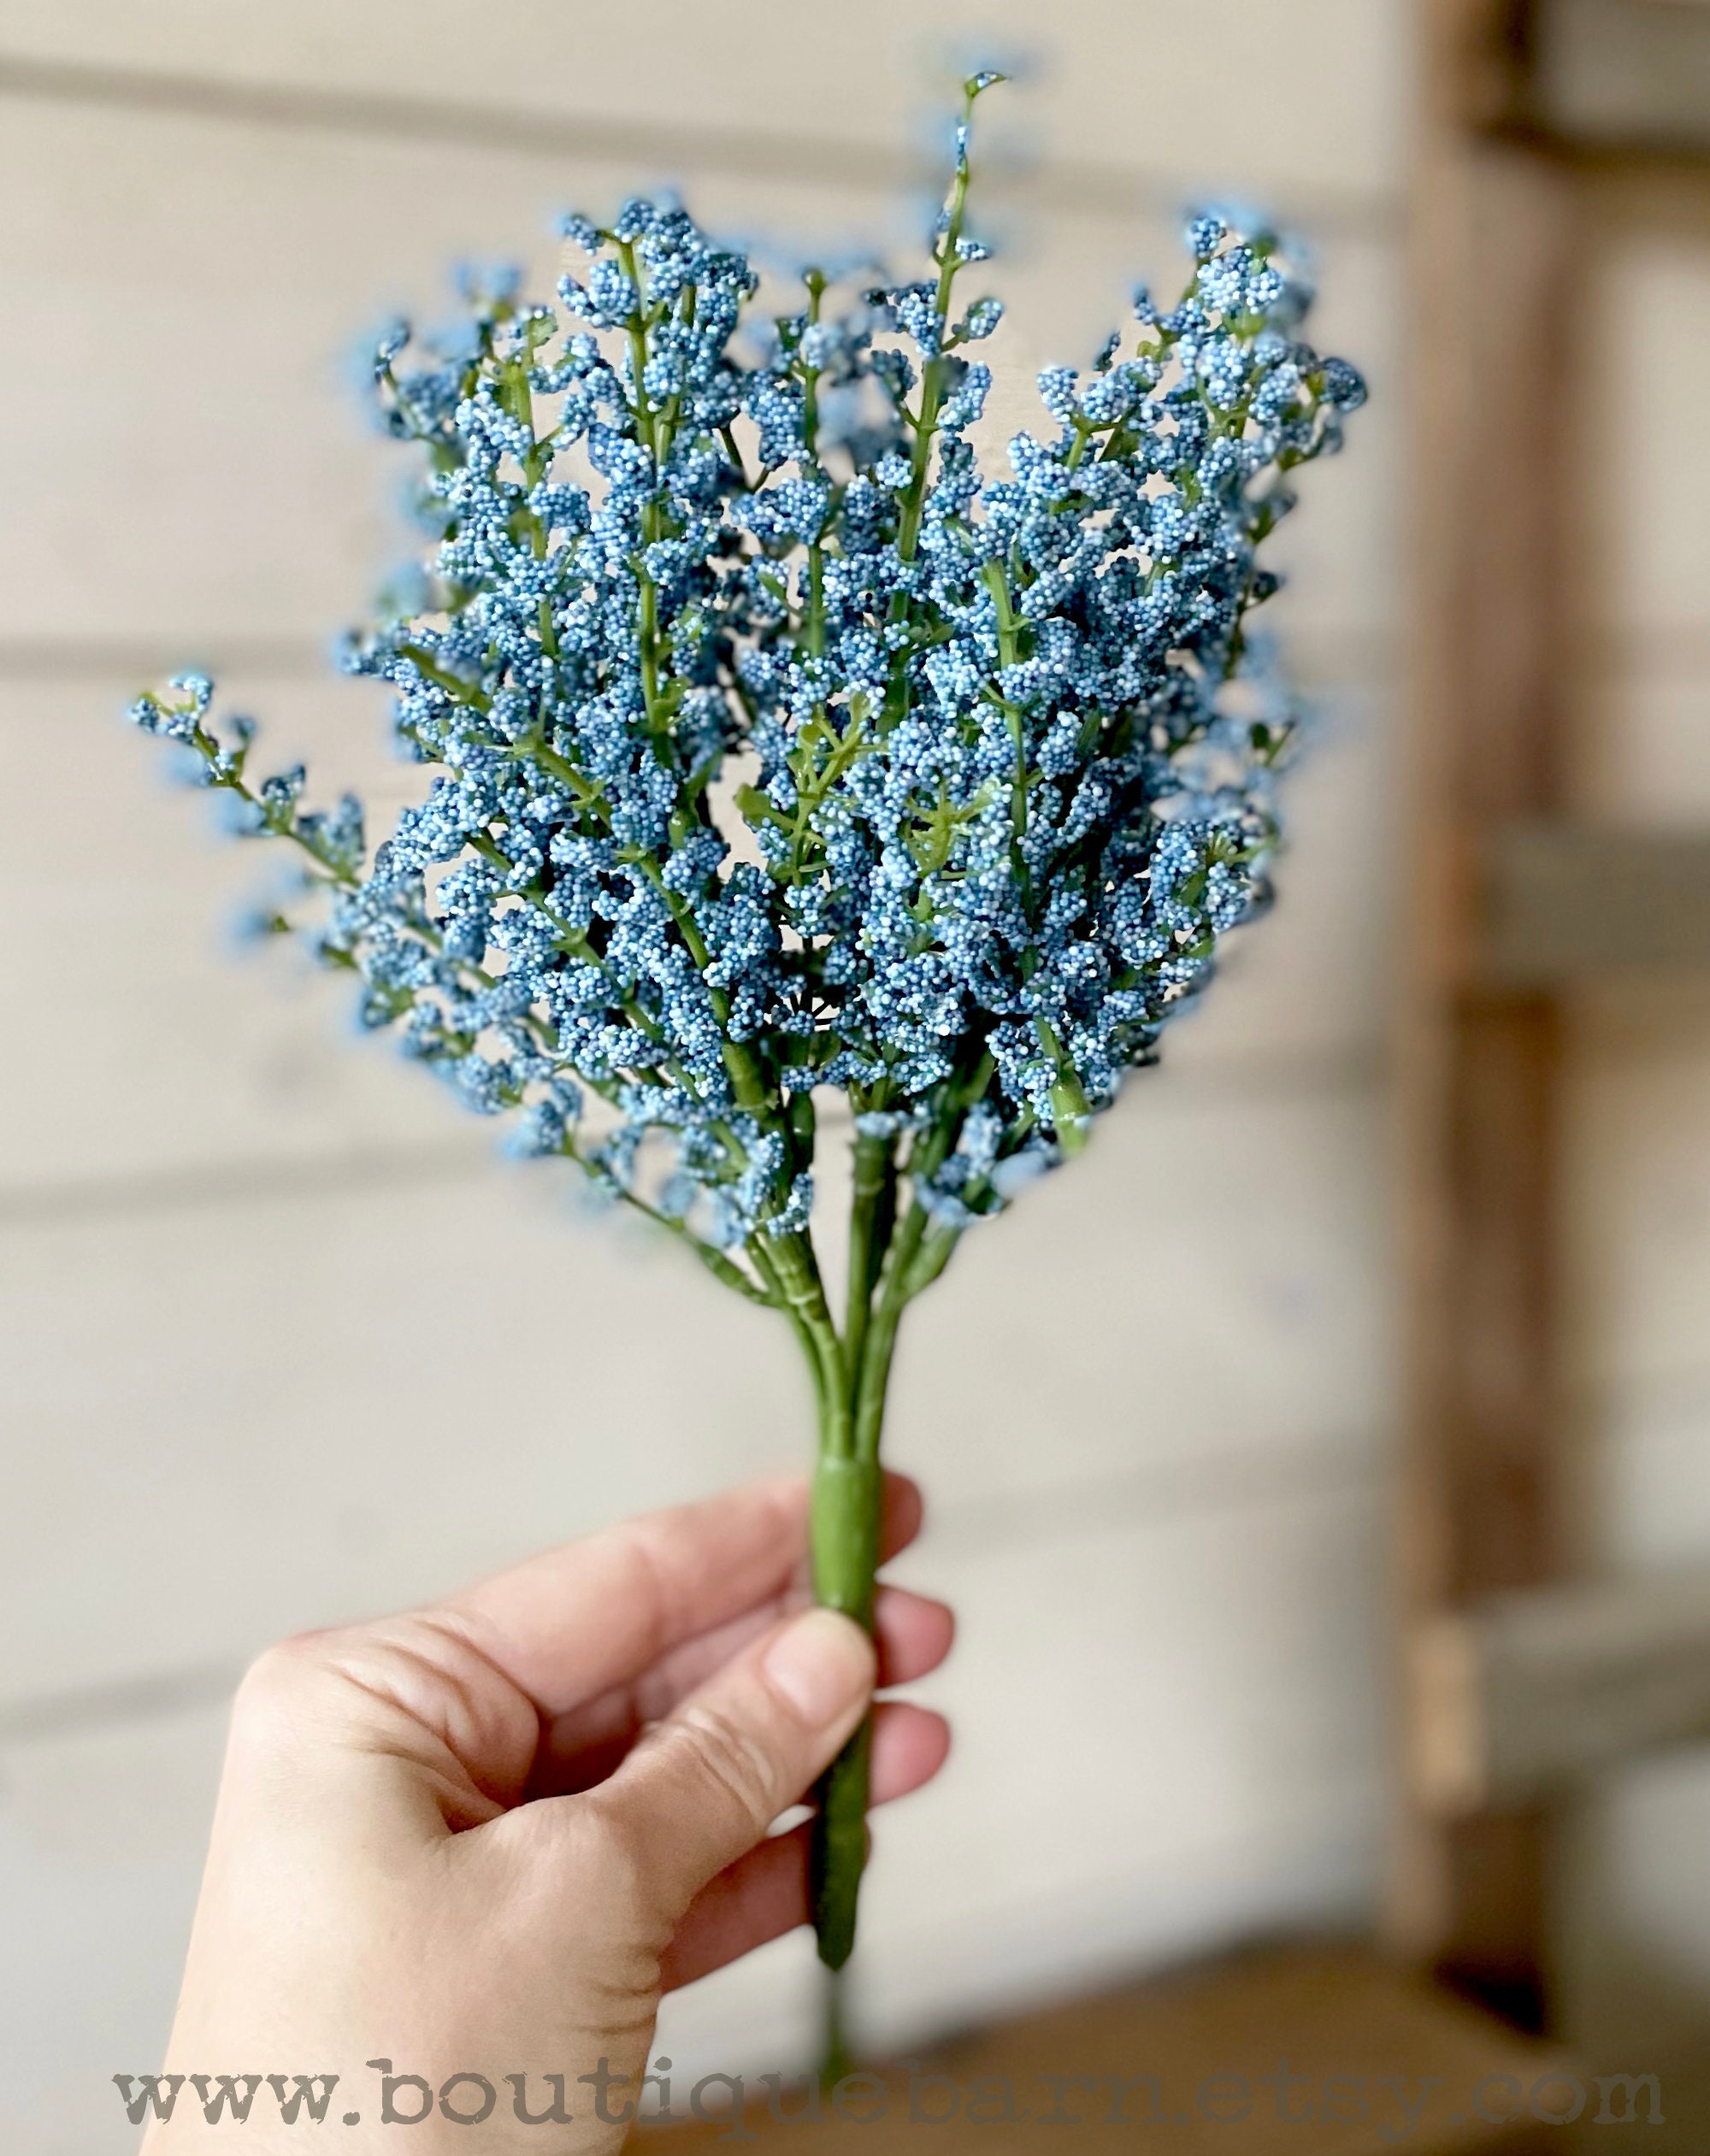 Blue Wildflower Spray, Faux Dried Flowers for Vase, Rustic